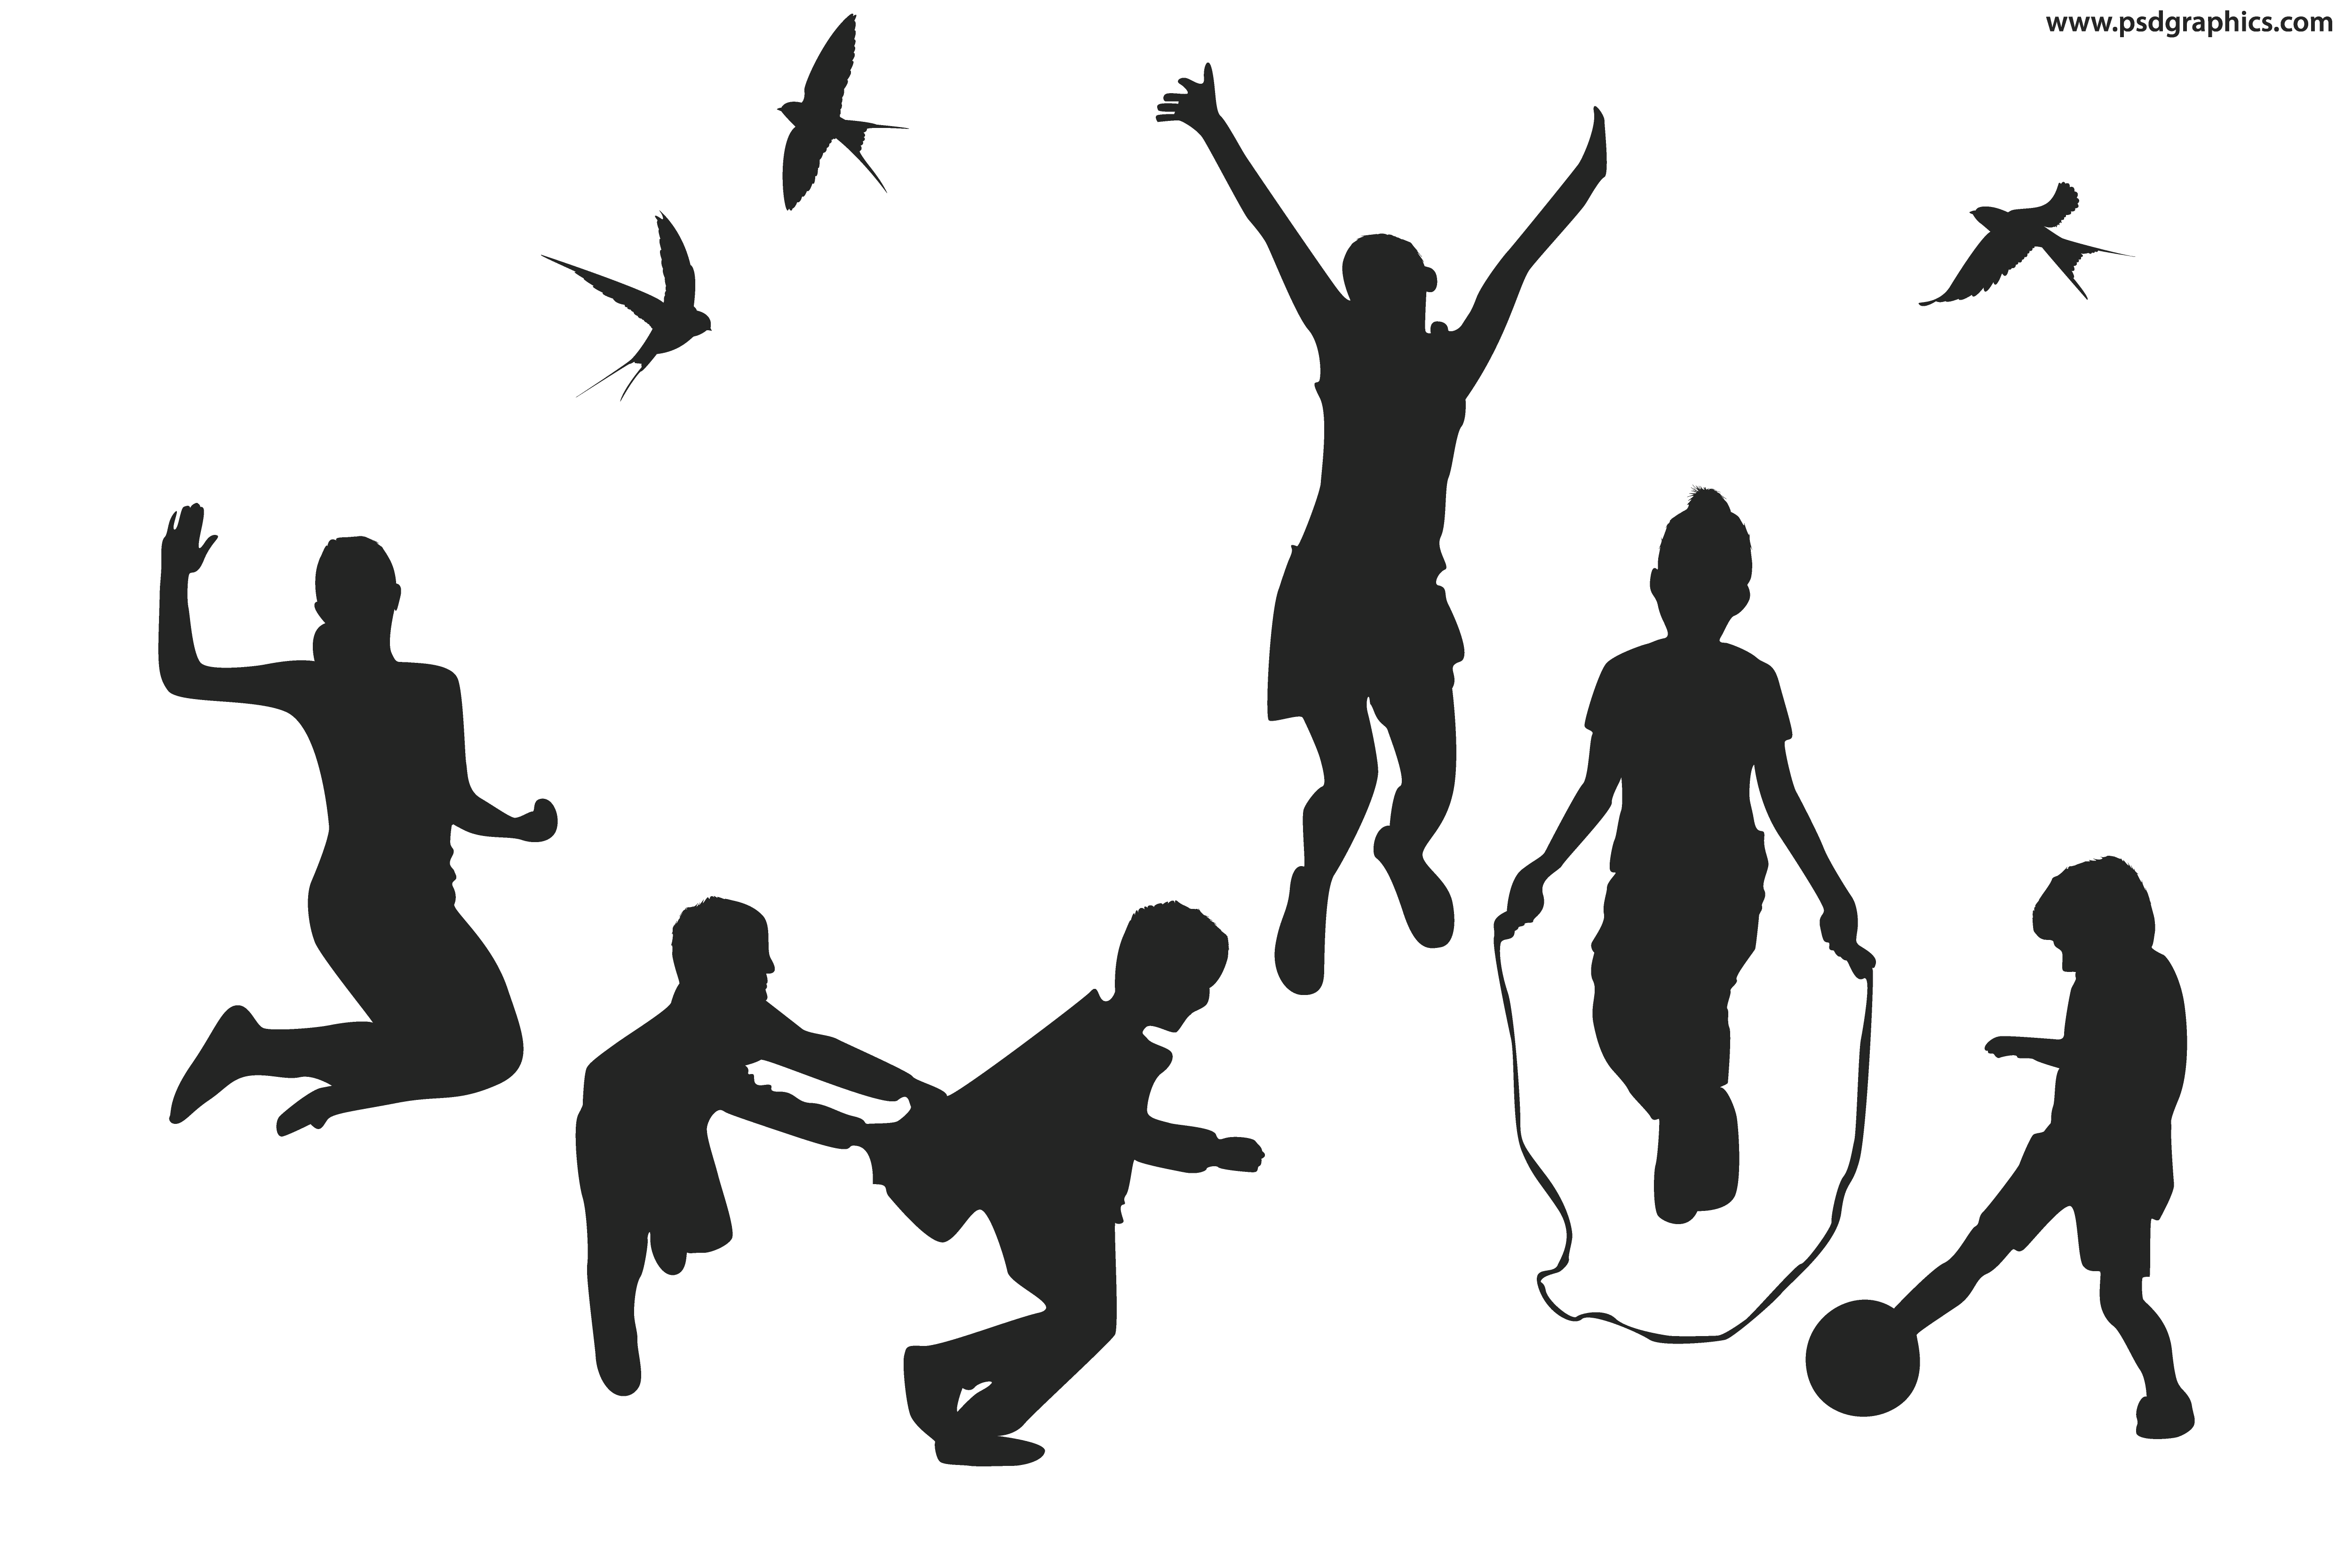 Teen clipart sensitivity. Kids playing silhouette at